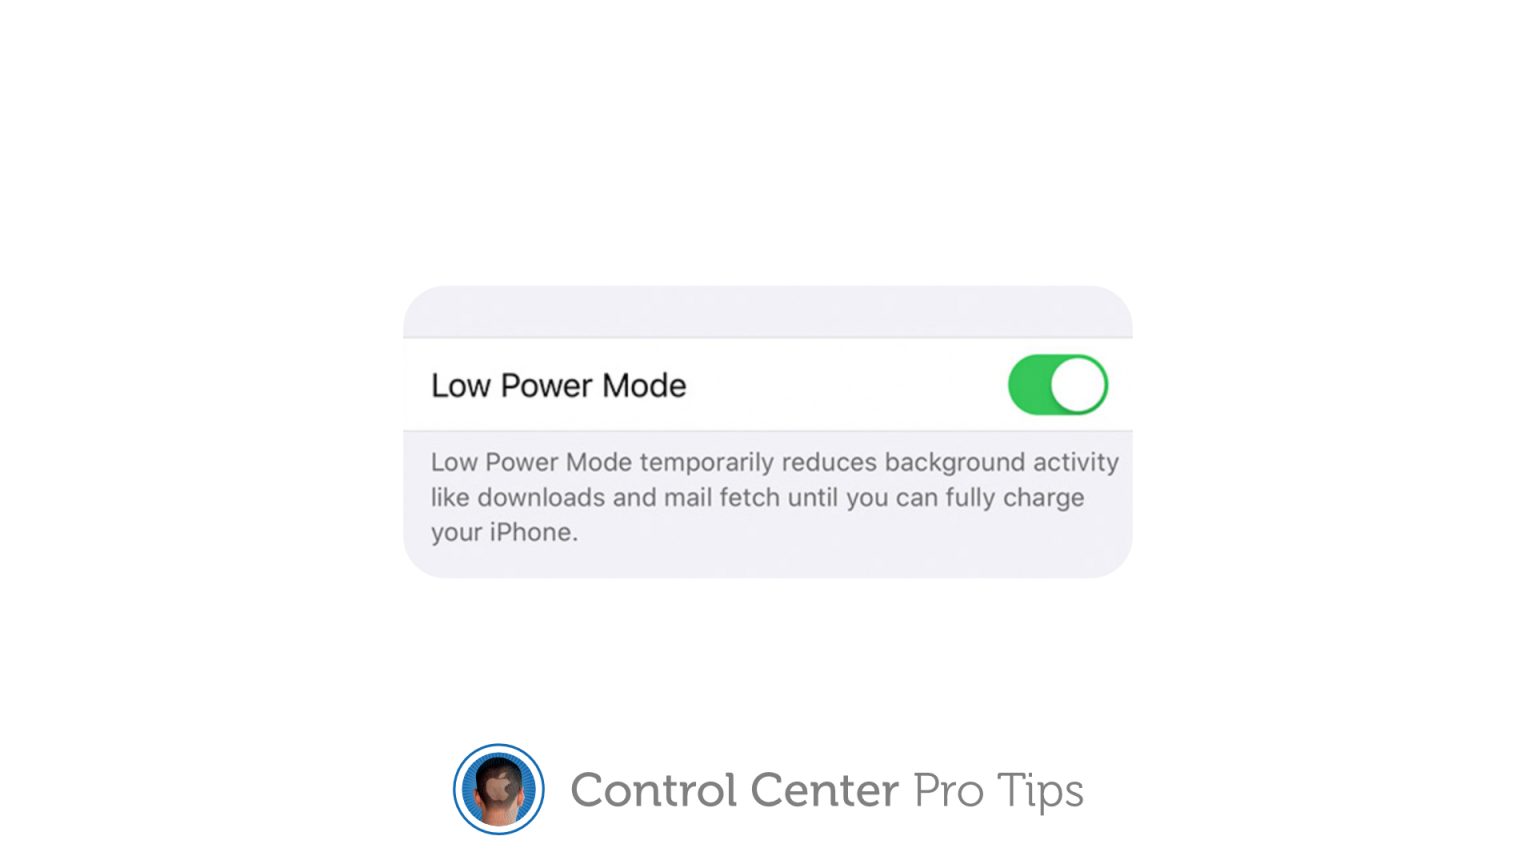 Activate Low Power Mode in Control Center